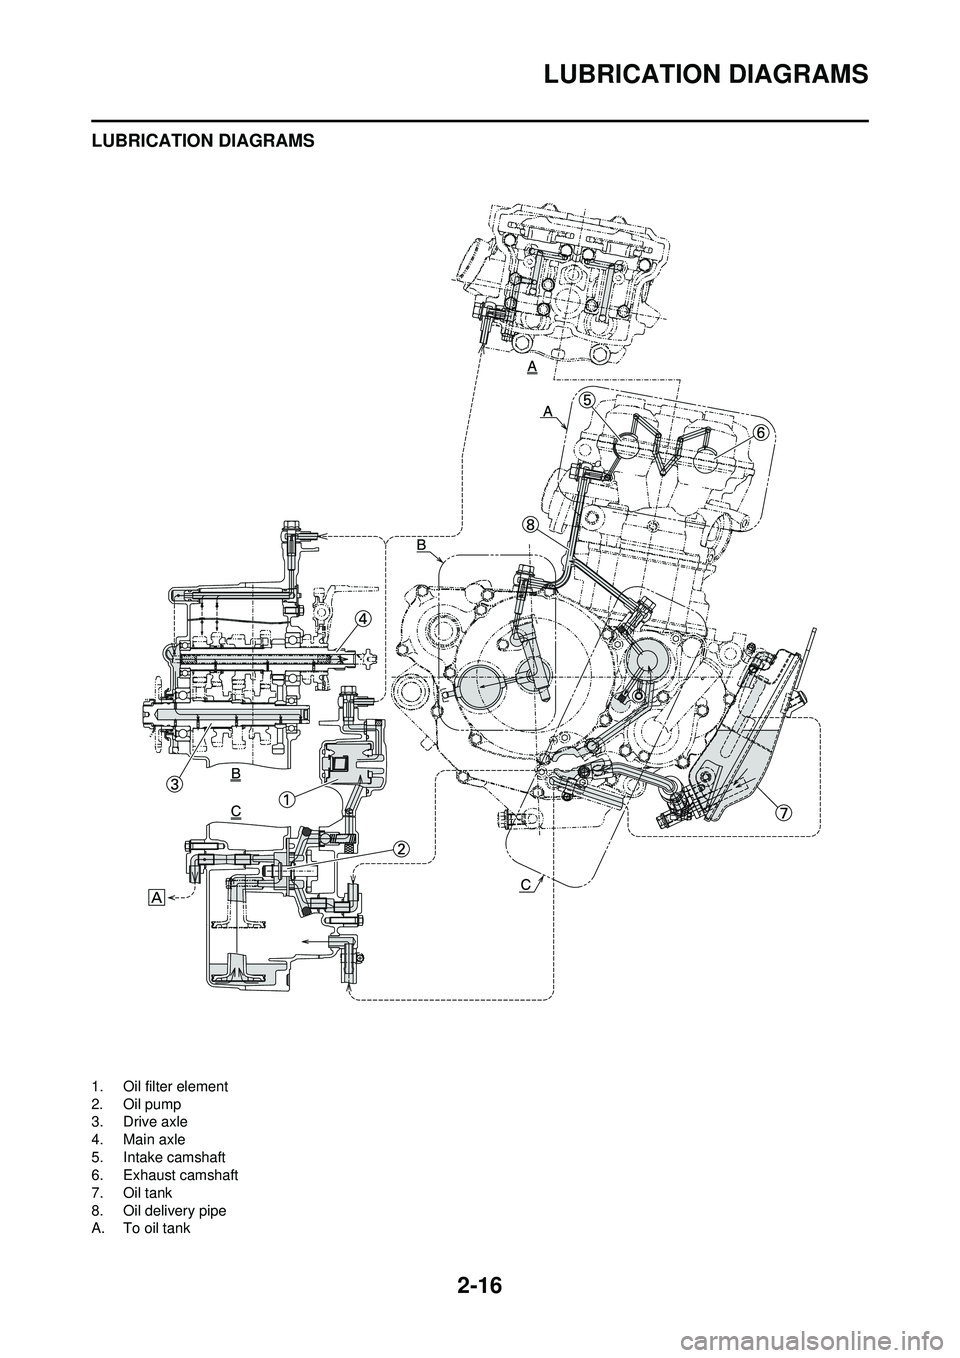 YAMAHA YZ250F 2010  Owners Manual 2-16
LUBRICATION DIAGRAMS
LUBRICATION DIAGRAMS
1. Oil filter element
2. Oil pump
3. Drive axle
4. Main axle
5. Intake camshaft
6. Exhaust camshaft
7. Oil tank
8. Oil delivery pipe
A. To oil tank 